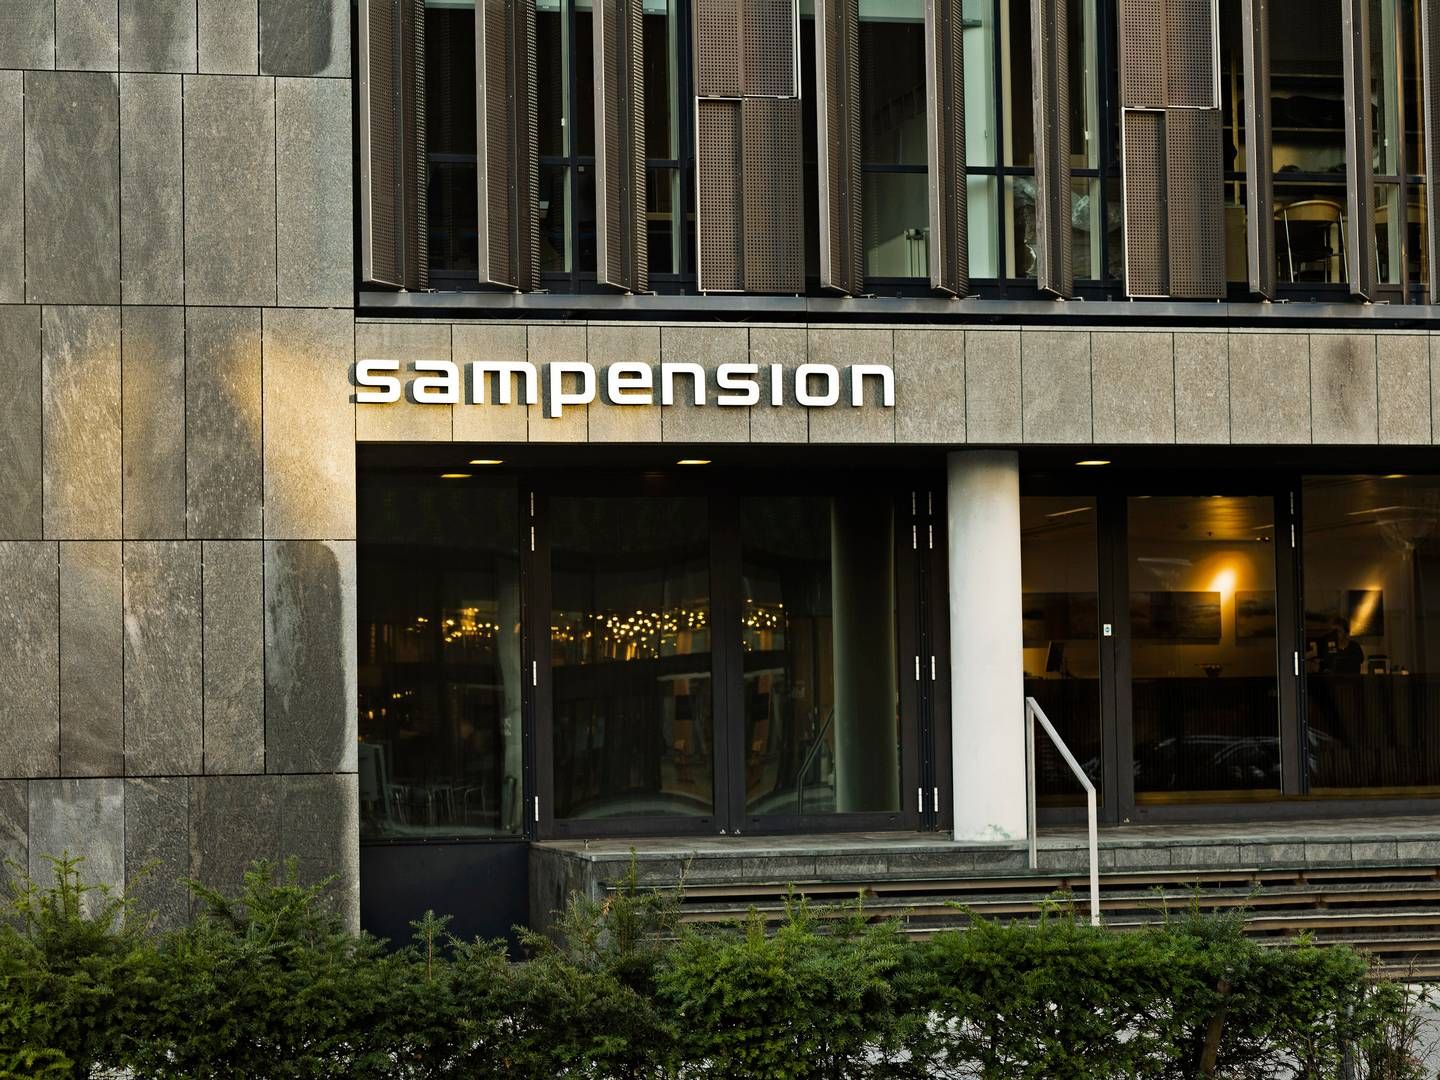 Through external index funds, customers at Sampension have the opportunity to invest in companies that are otherwise placed on the Danish pension fund's blacklist . | Photo: Pr/sampension